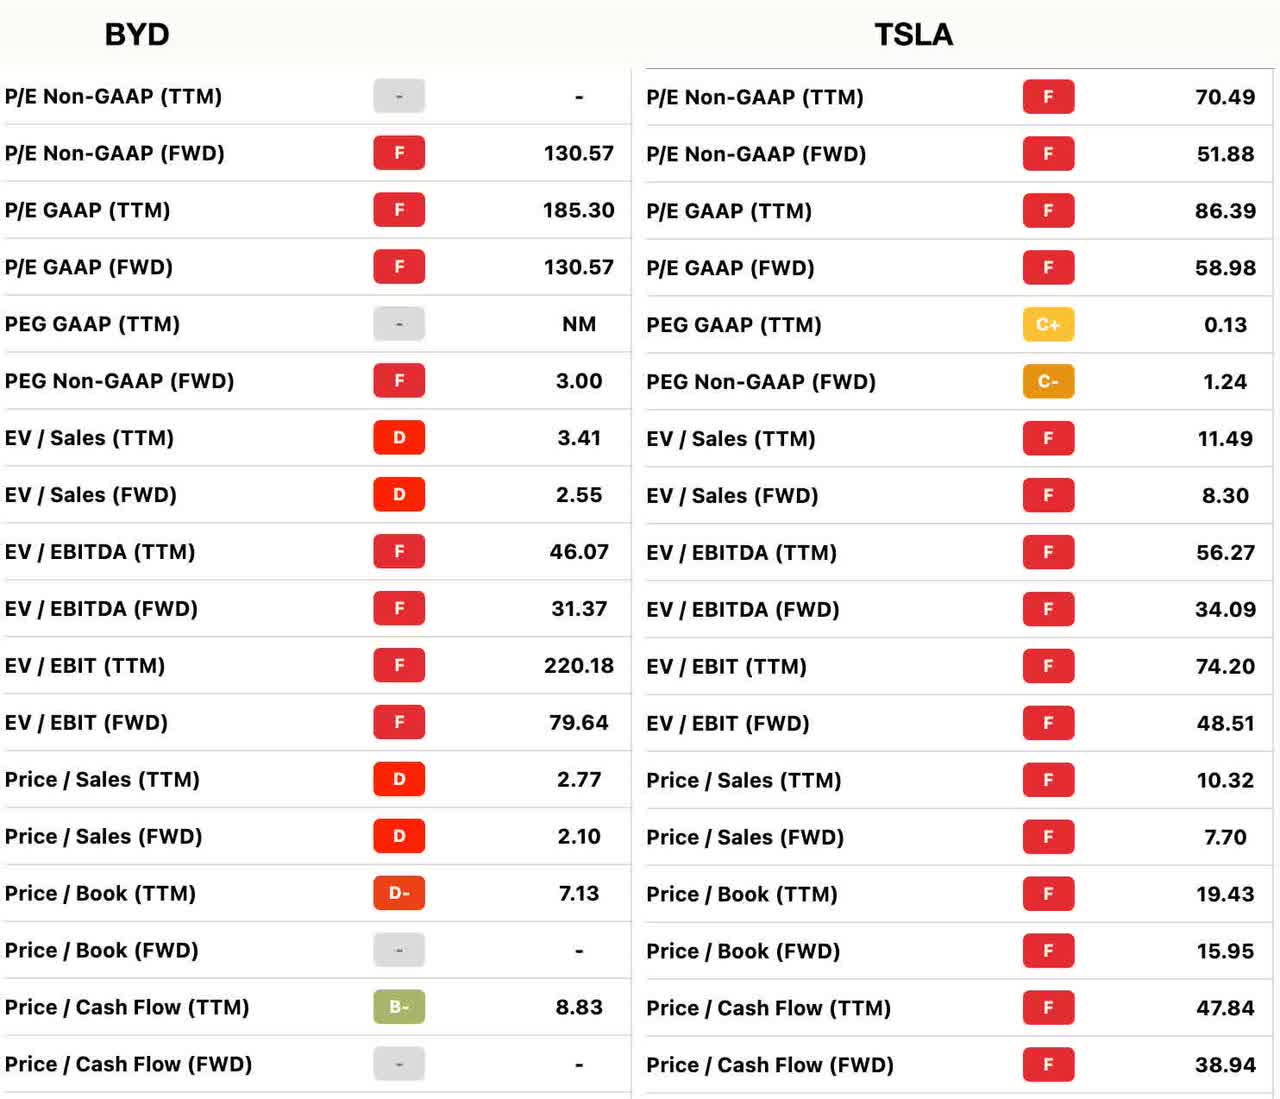 BYD and TSLA multiples